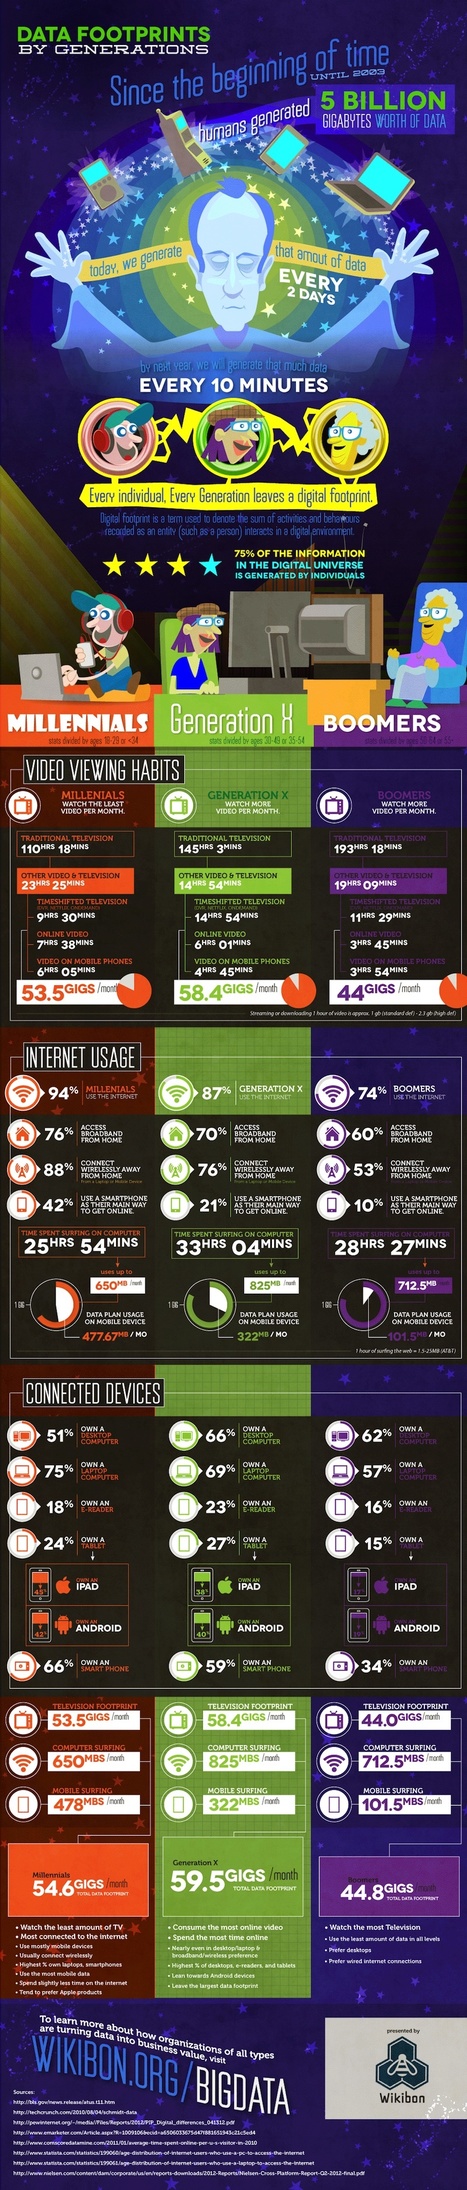 Data Footprints by Generations #Infographic | Web 2.0 for juandoming | Scoop.it